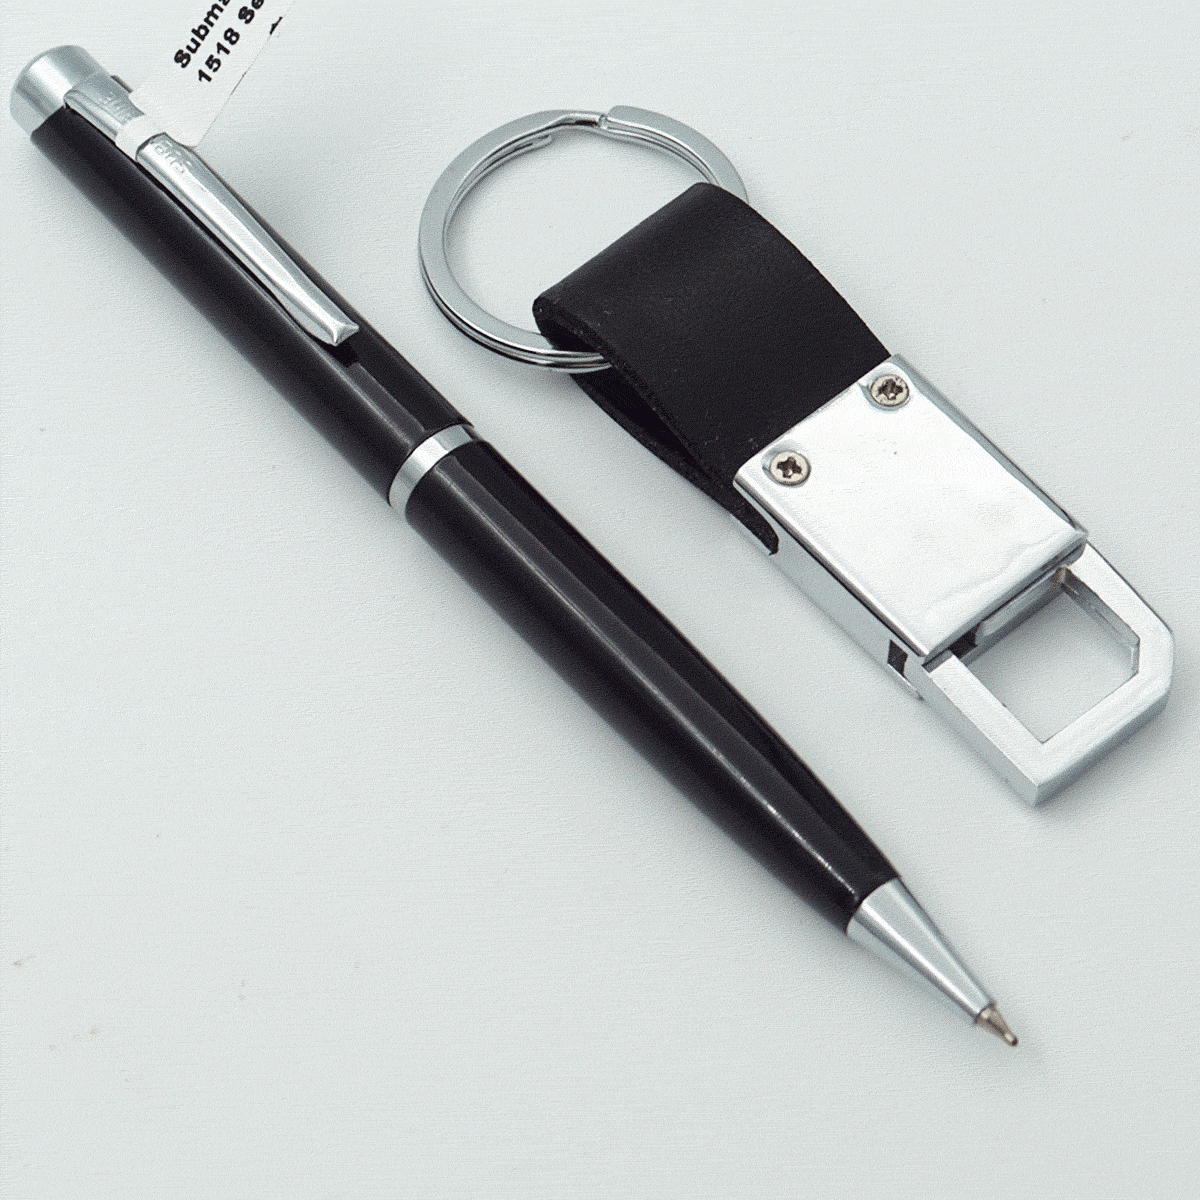 Submarine 1518 Black Color Body With Black Color Cap And Silver Clip Fine Tip Twist Type Ball Pen With Keychain Pen Set SKU 23928